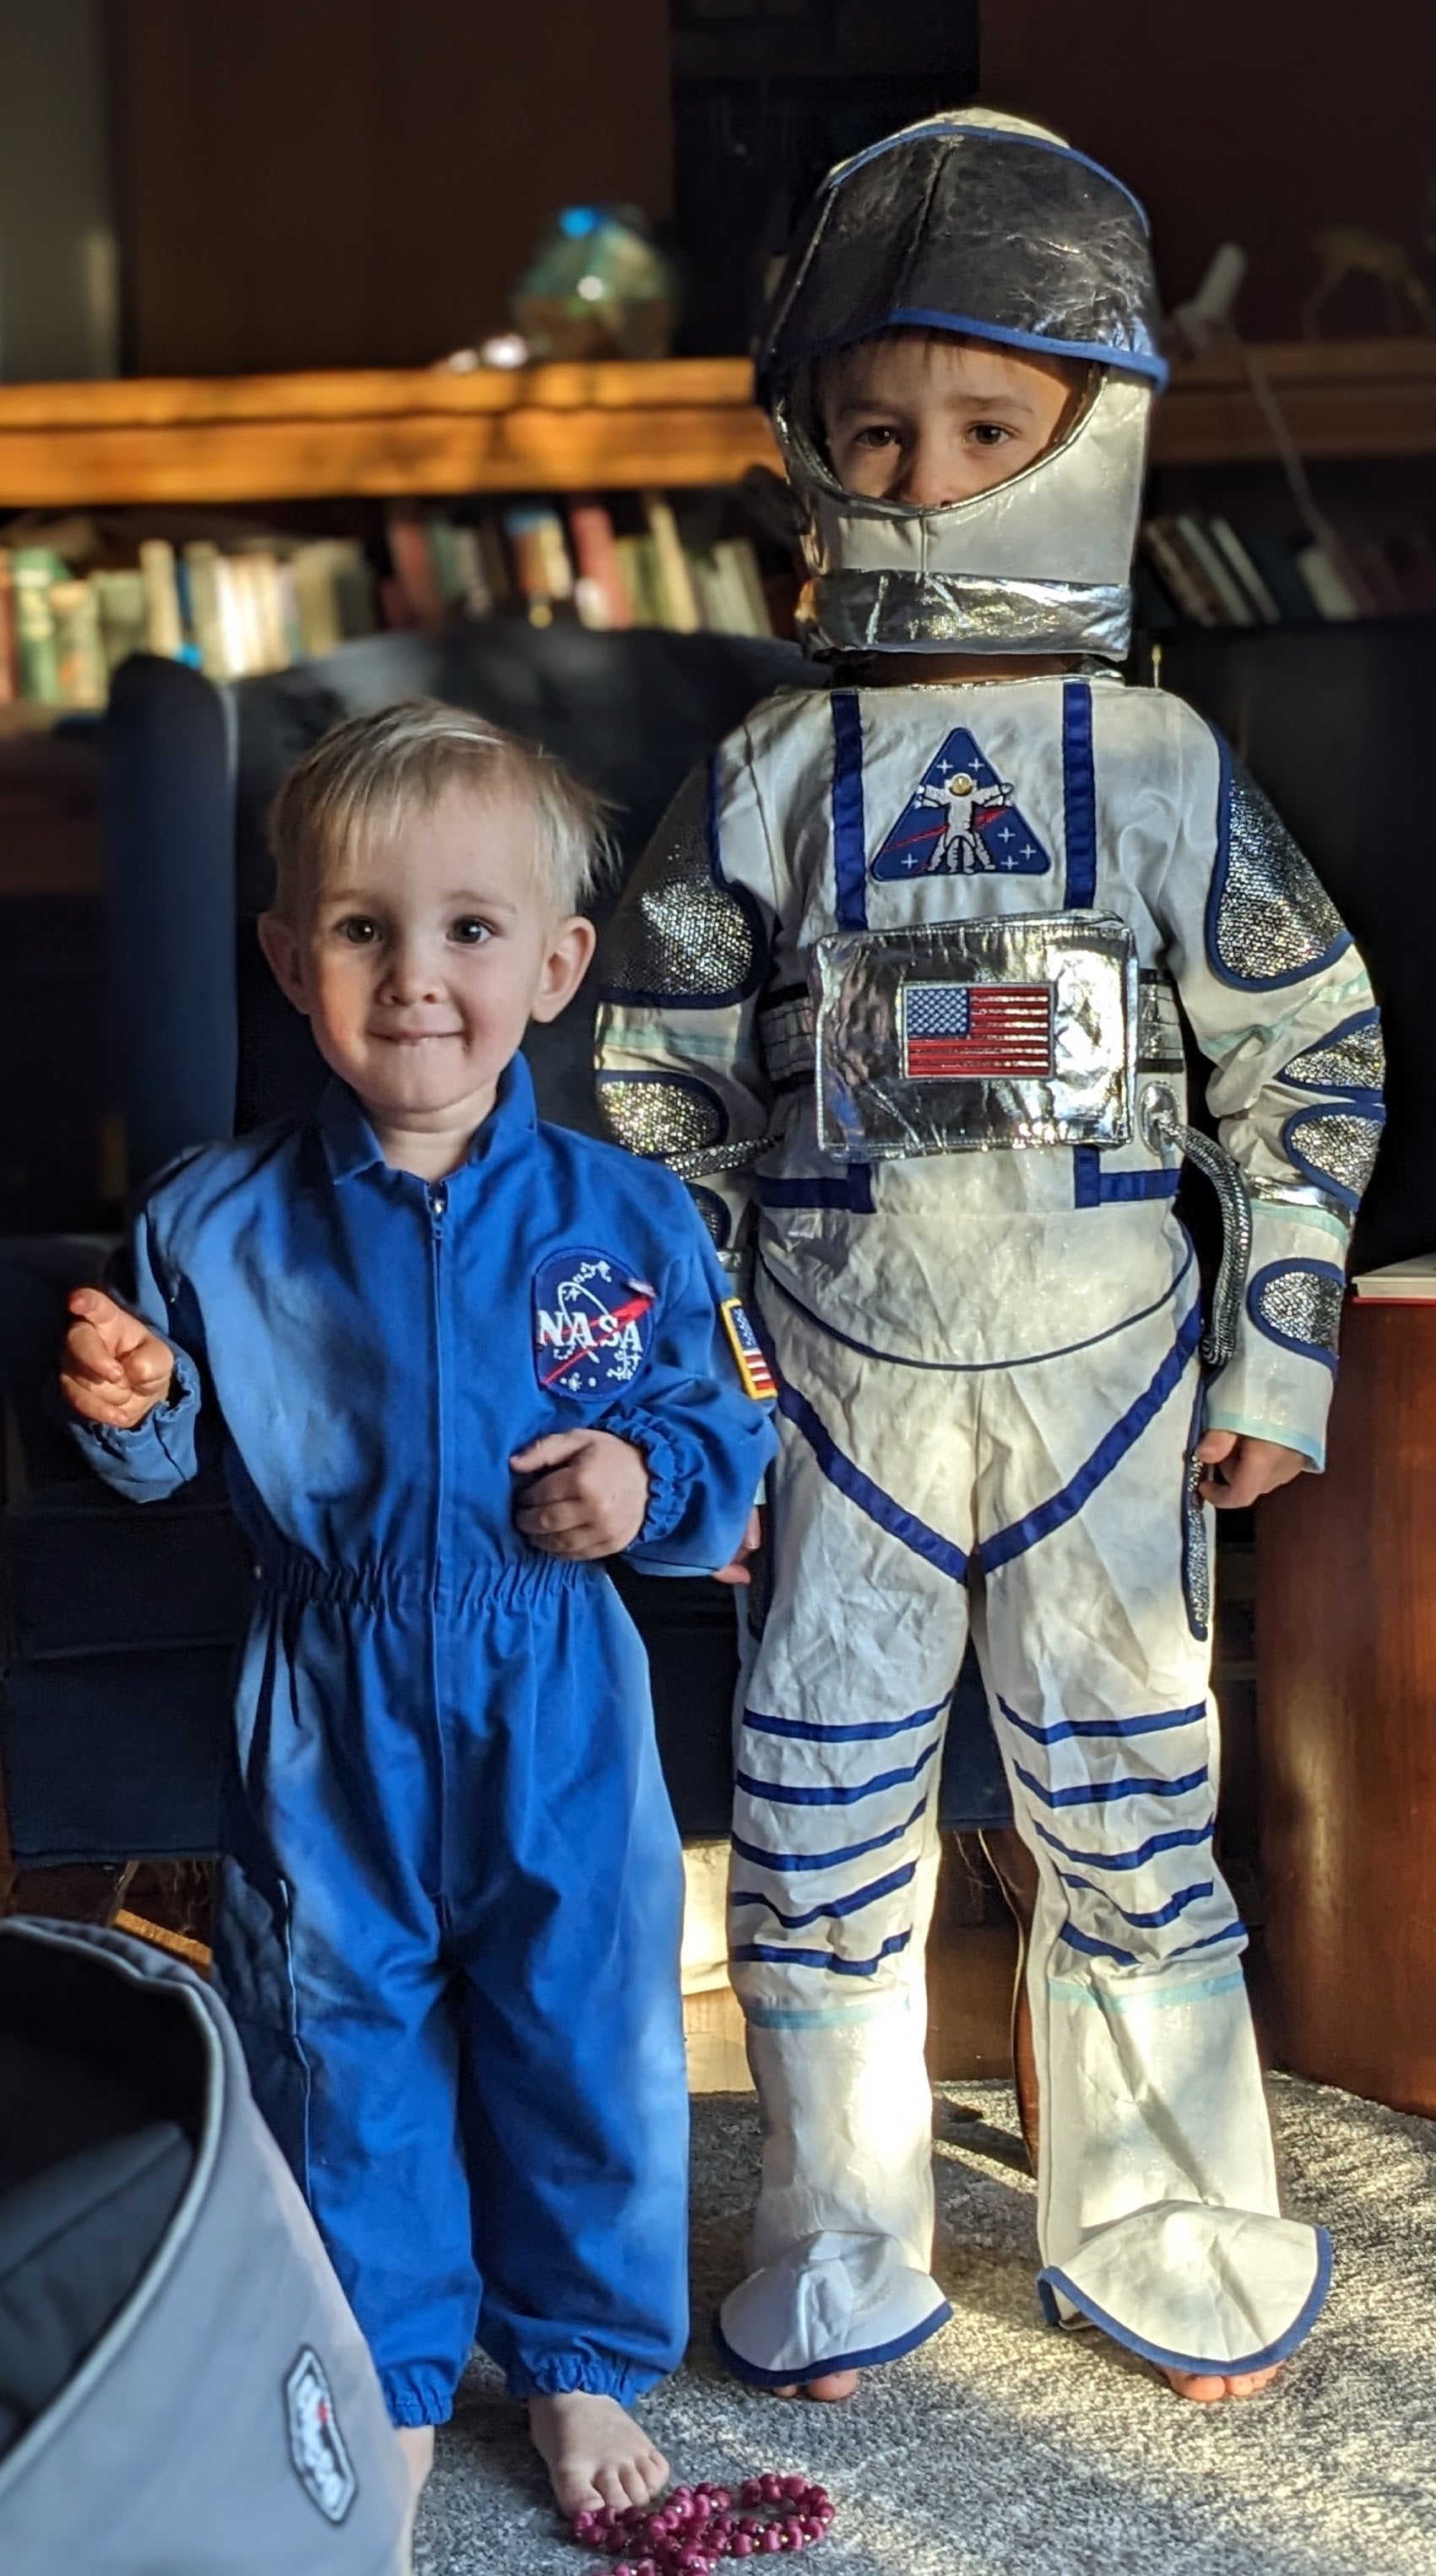 two of the younger Piper and Leaf kids, brothers, adorned in their astronaut suit, geared and ready for space exploration